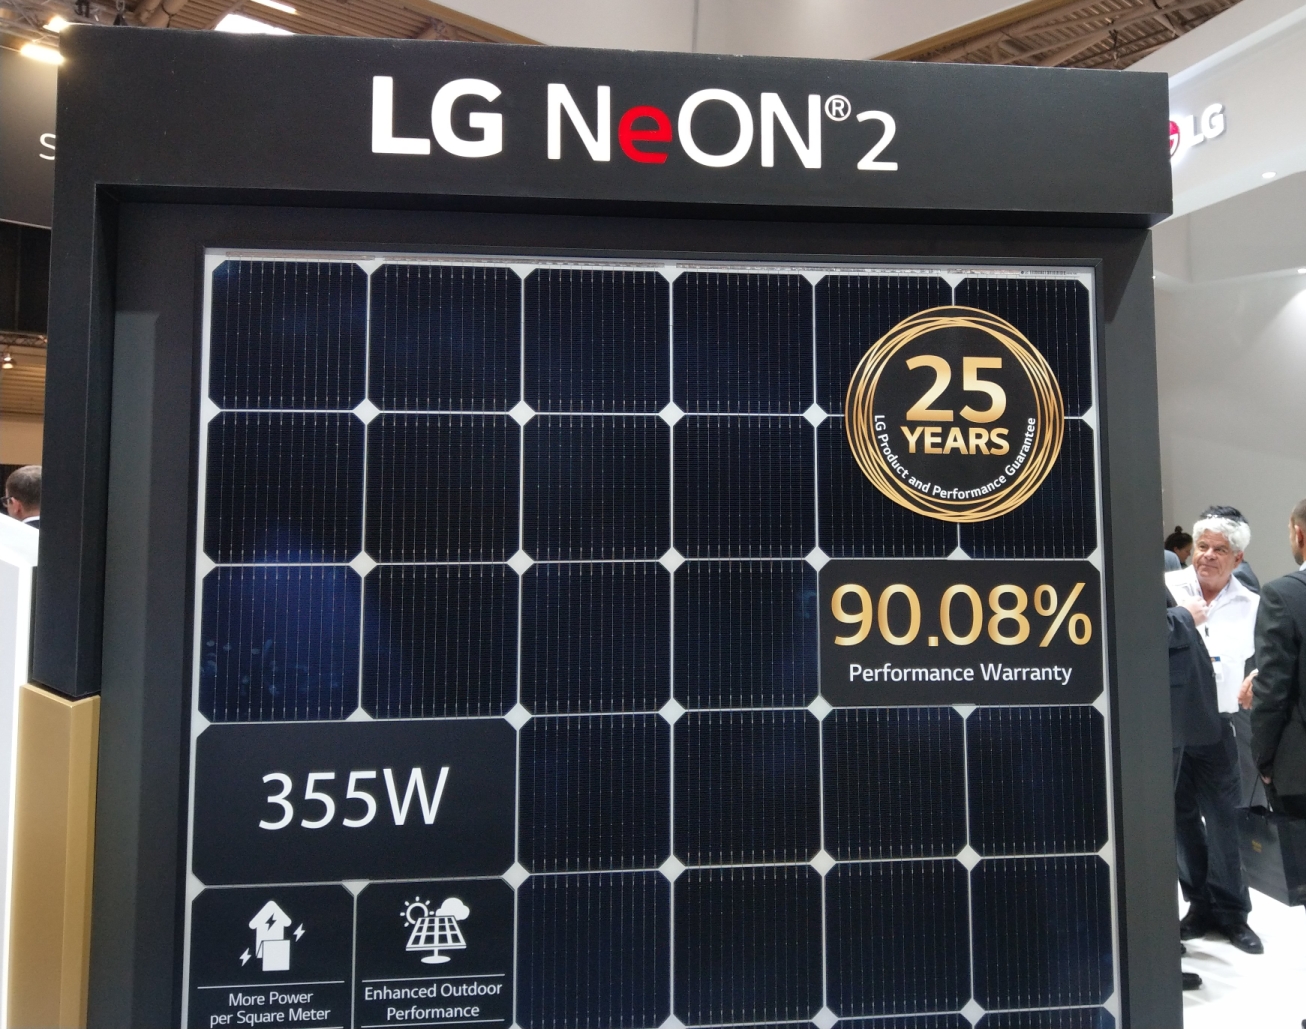 lg-solar-panels-and-battery-systems-2019-clean-energy-reviews